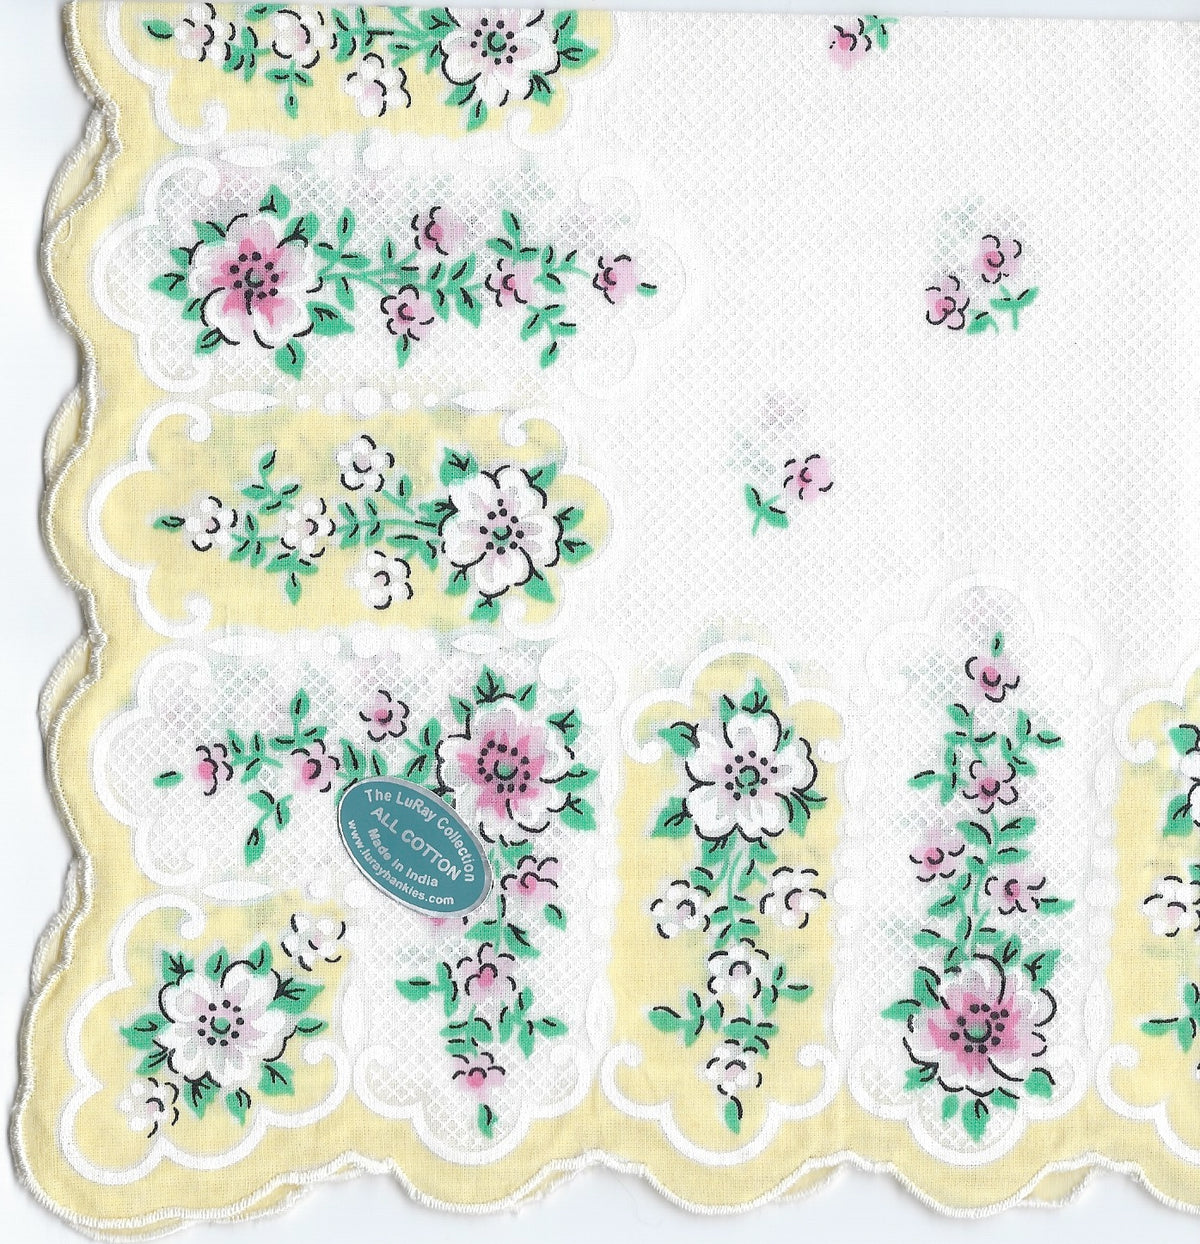 A detailed image of a Vintage-Inspired Hanky from Hankies ala Carte, with a scalloped edge, featuring intricate lace patterns and embroidered floral designs in shades of pink, green, and white.